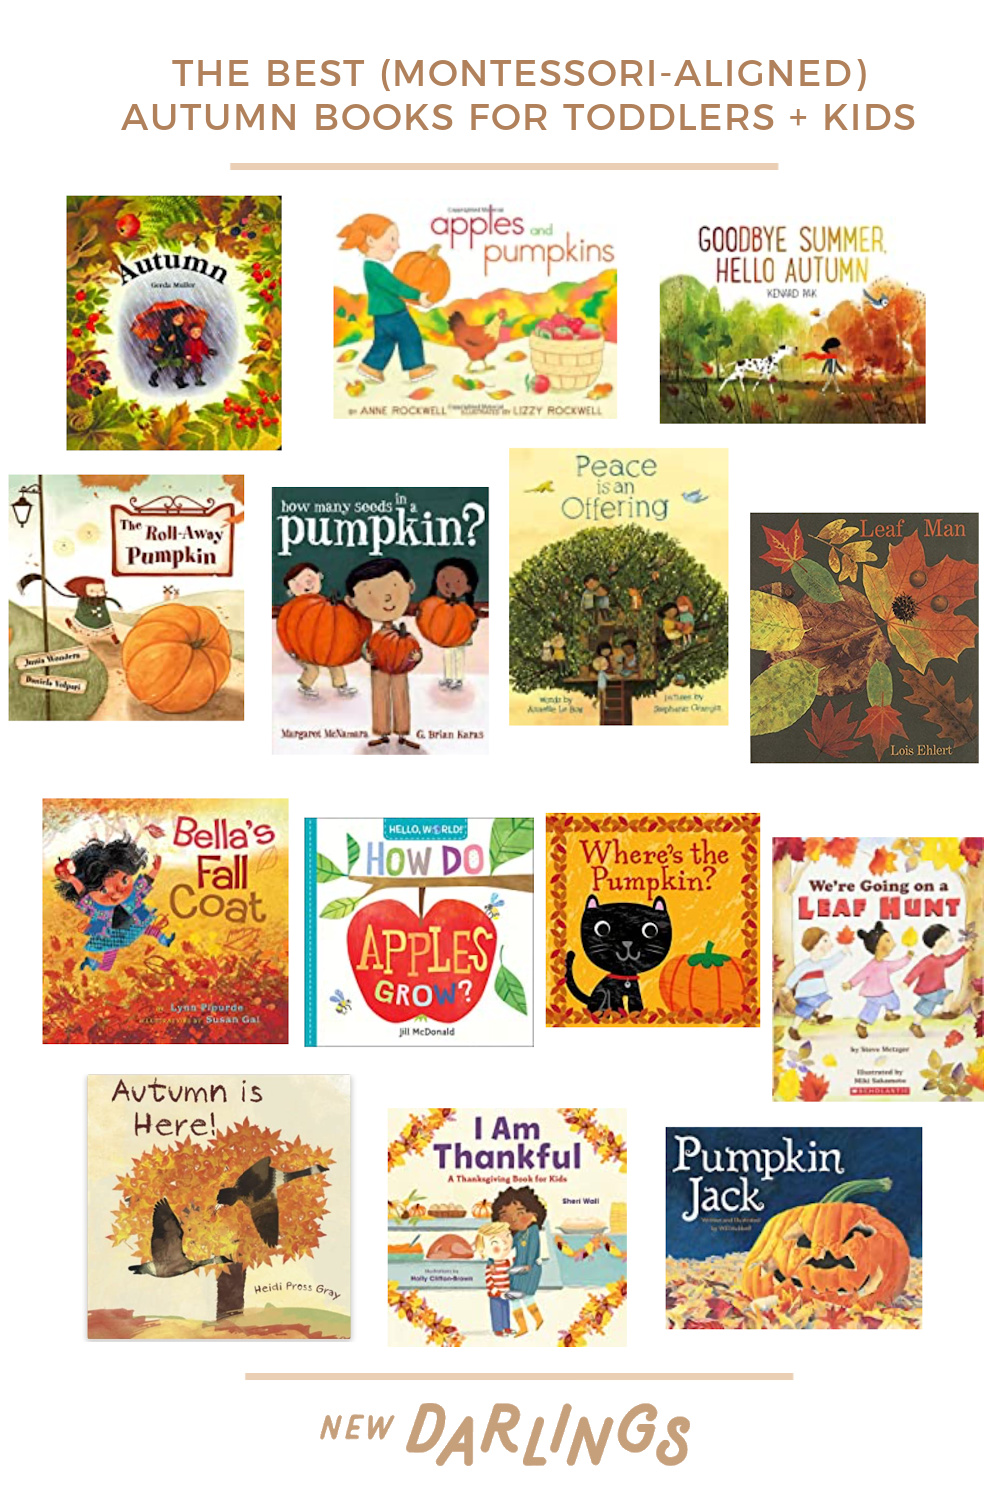 The Best Autumn Books for Toddlers New Darlings